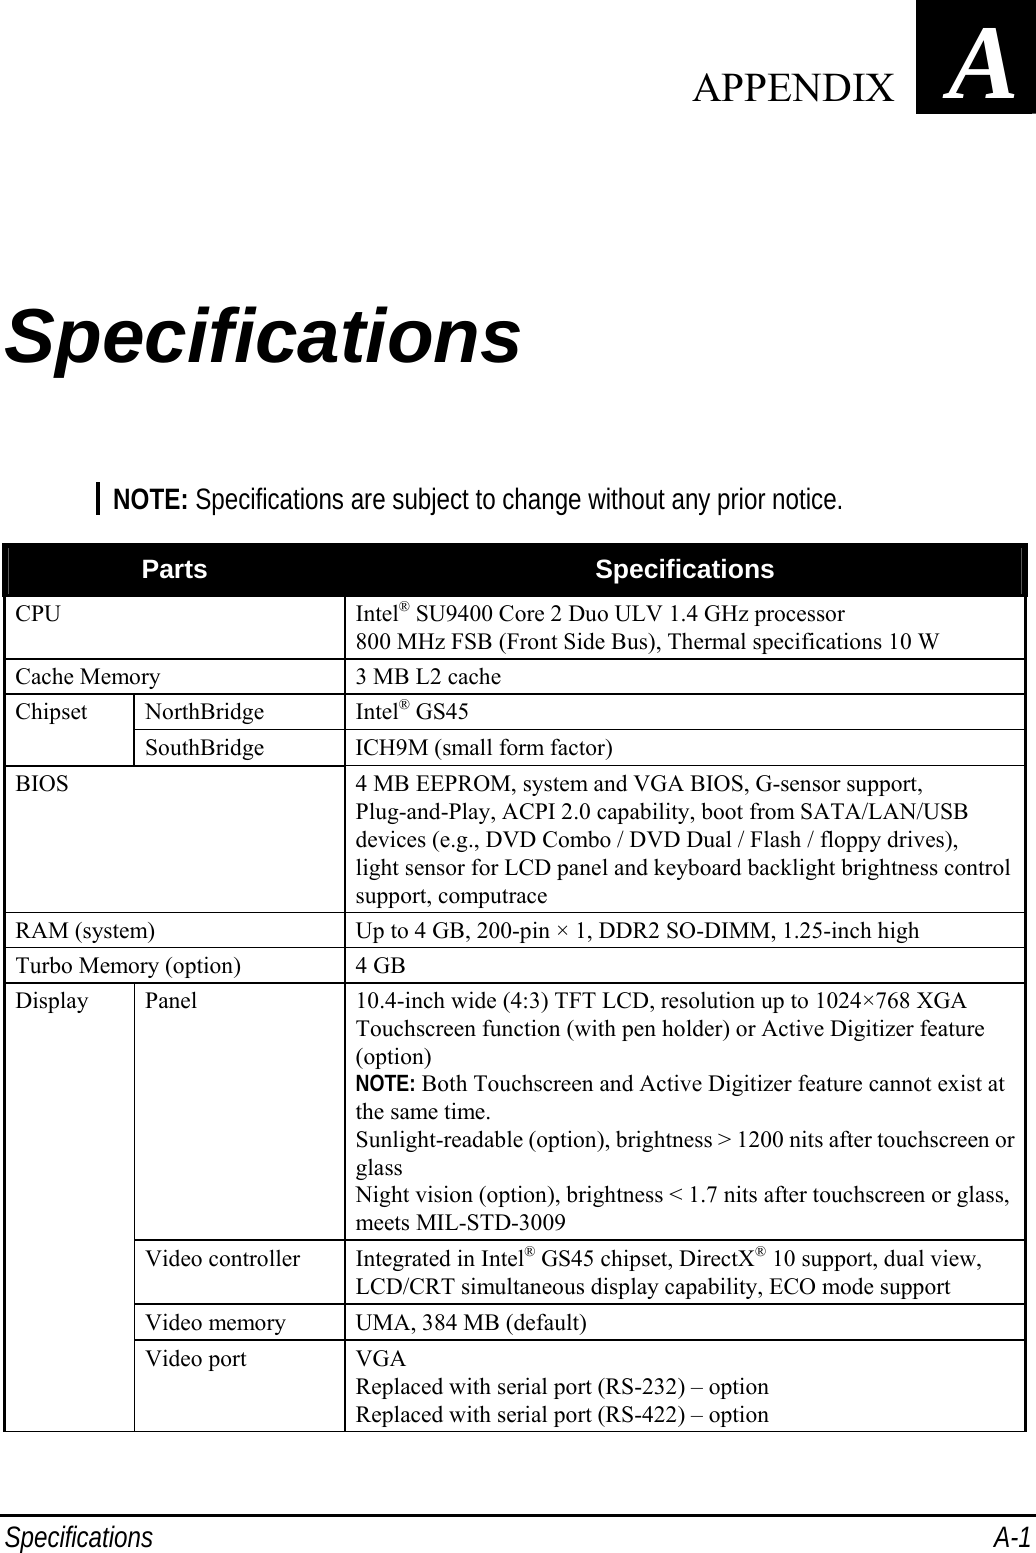  Specifications A-1 Appendix   ASpecifications NOTE: Specifications are subject to change without any prior notice.  Parts  Specifications CPU Intel® SU9400 Core 2 Duo ULV 1.4 GHz processor 800 MHz FSB (Front Side Bus), Thermal specifications 10 W Cache Memory  3 MB L2 cache NorthBridge Intel® GS45 Chipset SouthBridge  ICH9M (small form factor) BIOS  4 MB EEPROM, system and VGA BIOS, G-sensor support, Plug-and-Play, ACPI 2.0 capability, boot from SATA/LAN/USB devices (e.g., DVD Combo / DVD Dual / Flash / floppy drives), light sensor for LCD panel and keyboard backlight brightness control support, computrace RAM (system)  Up to 4 GB, 200-pin × 1, DDR2 SO-DIMM, 1.25-inch high Turbo Memory (option)  4 GB Panel  10.4-inch wide (4:3) TFT LCD, resolution up to 1024×768 XGA Touchscreen function (with pen holder) or Active Digitizer feature (option) NOTE: Both Touchscreen and Active Digitizer feature cannot exist at the same time. Sunlight-readable (option), brightness &gt; 1200 nits after touchscreen or glass Night vision (option), brightness &lt; 1.7 nits after touchscreen or glass, meets MIL-STD-3009 Video controller  Integrated in Intel® GS45 chipset, DirectX® 10 support, dual view, LCD/CRT simultaneous display capability, ECO mode support Video memory  UMA, 384 MB (default) Display Video port  VGA Replaced with serial port (RS-232) – option Replaced with serial port (RS-422) – option  APPENDIX 